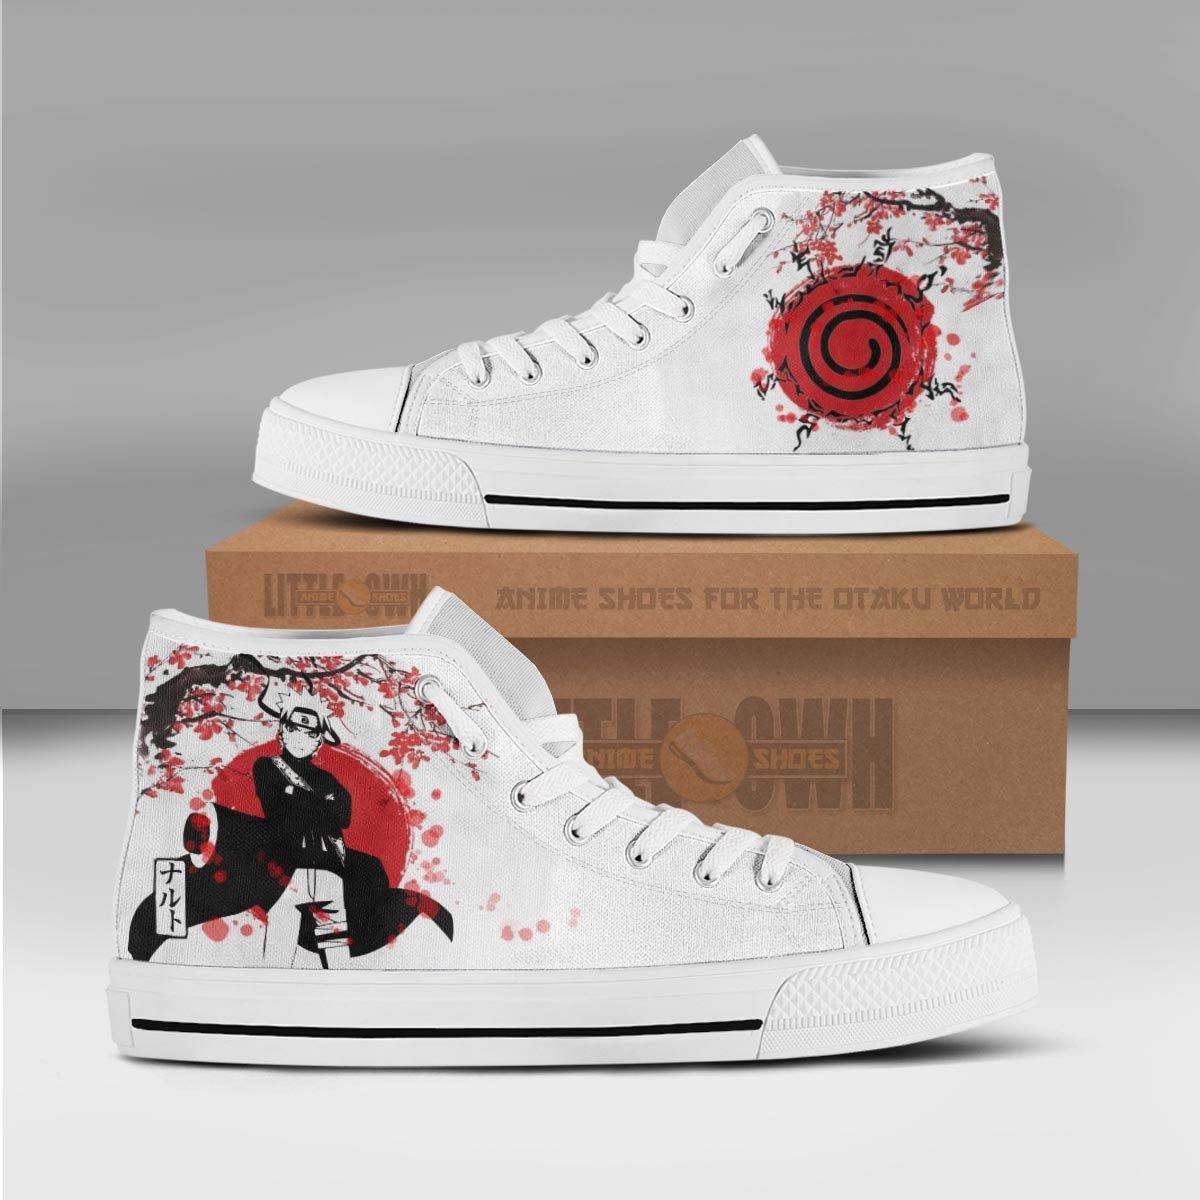 Naruto Naruto All Star High Top Sneakers Canvas Shoes Anime Custom